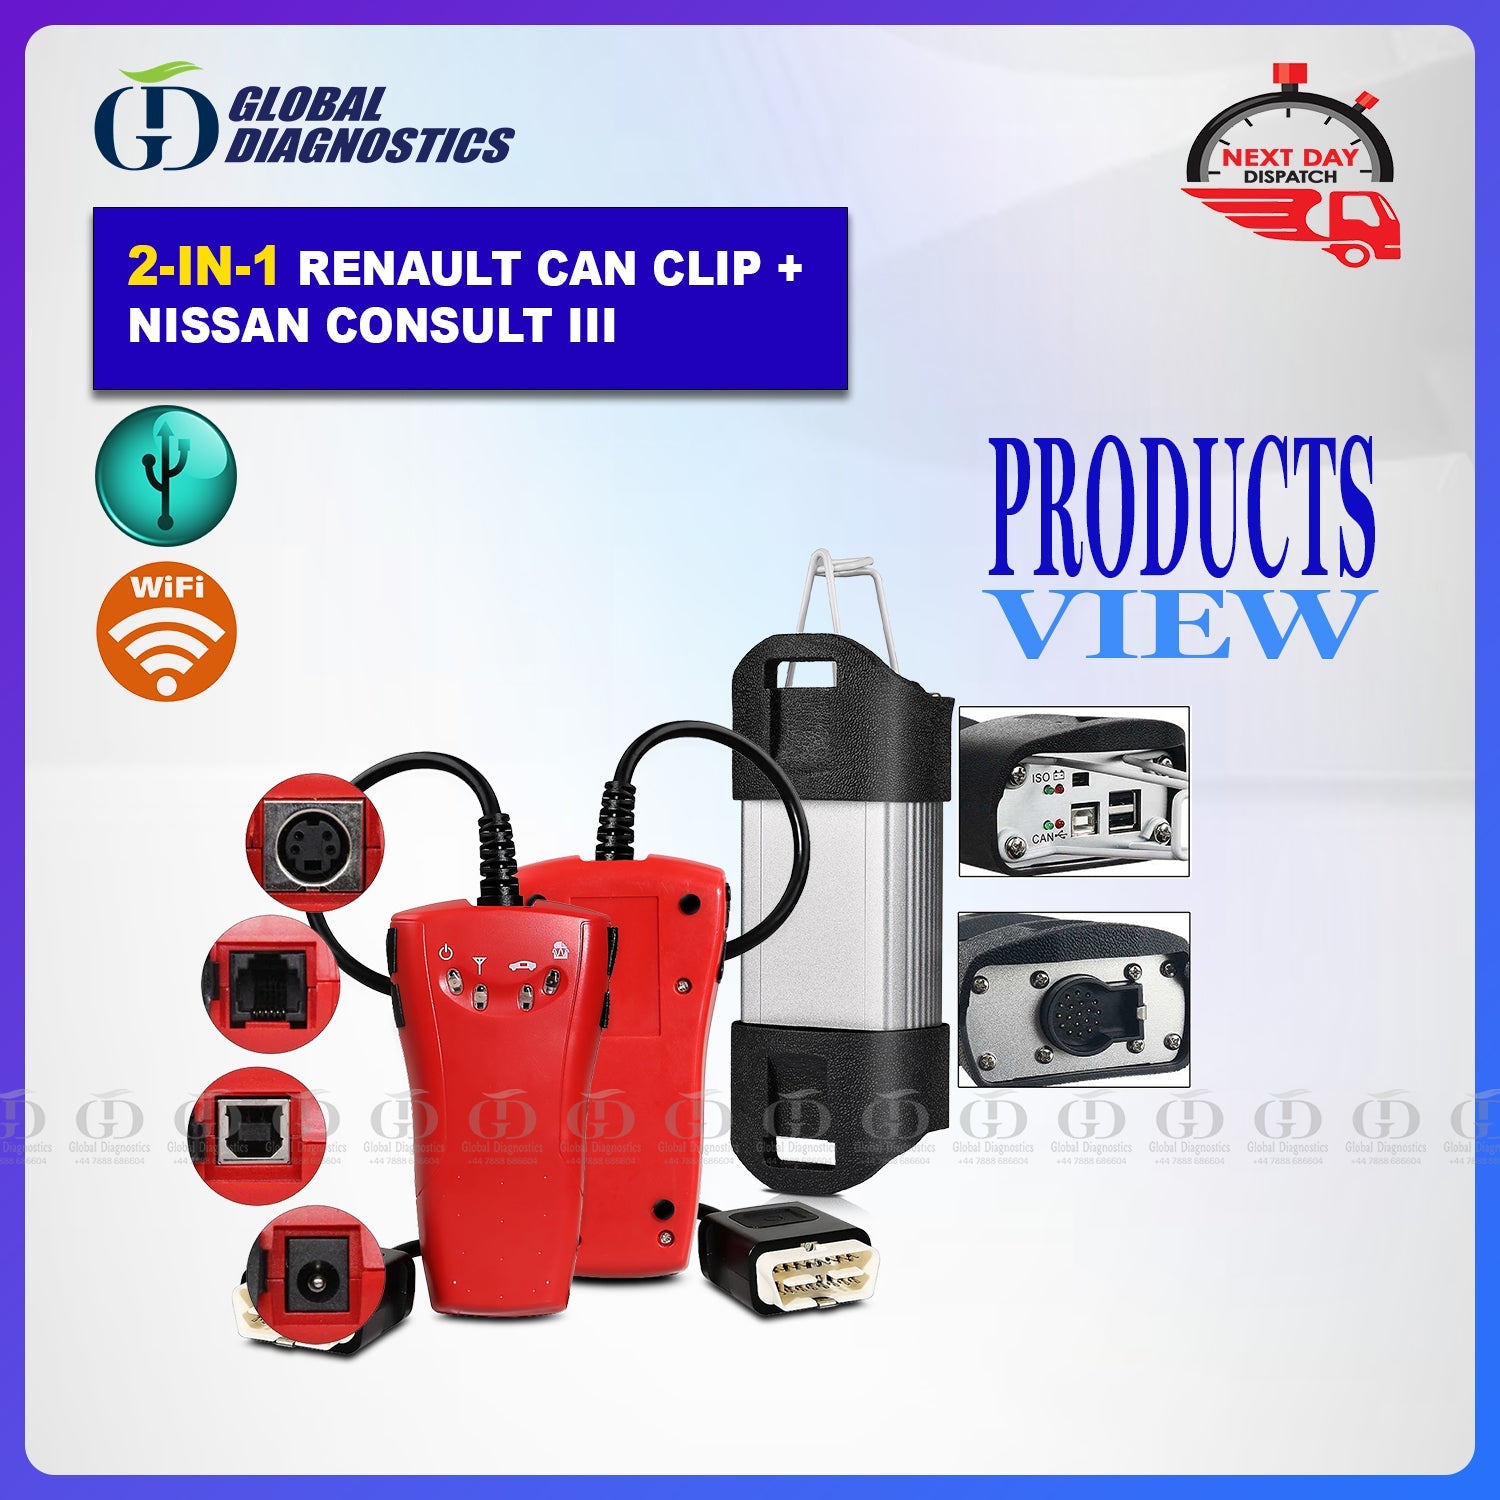 Renault CAN Clip V191 and Consult 3 III For Nissan 2 In 1